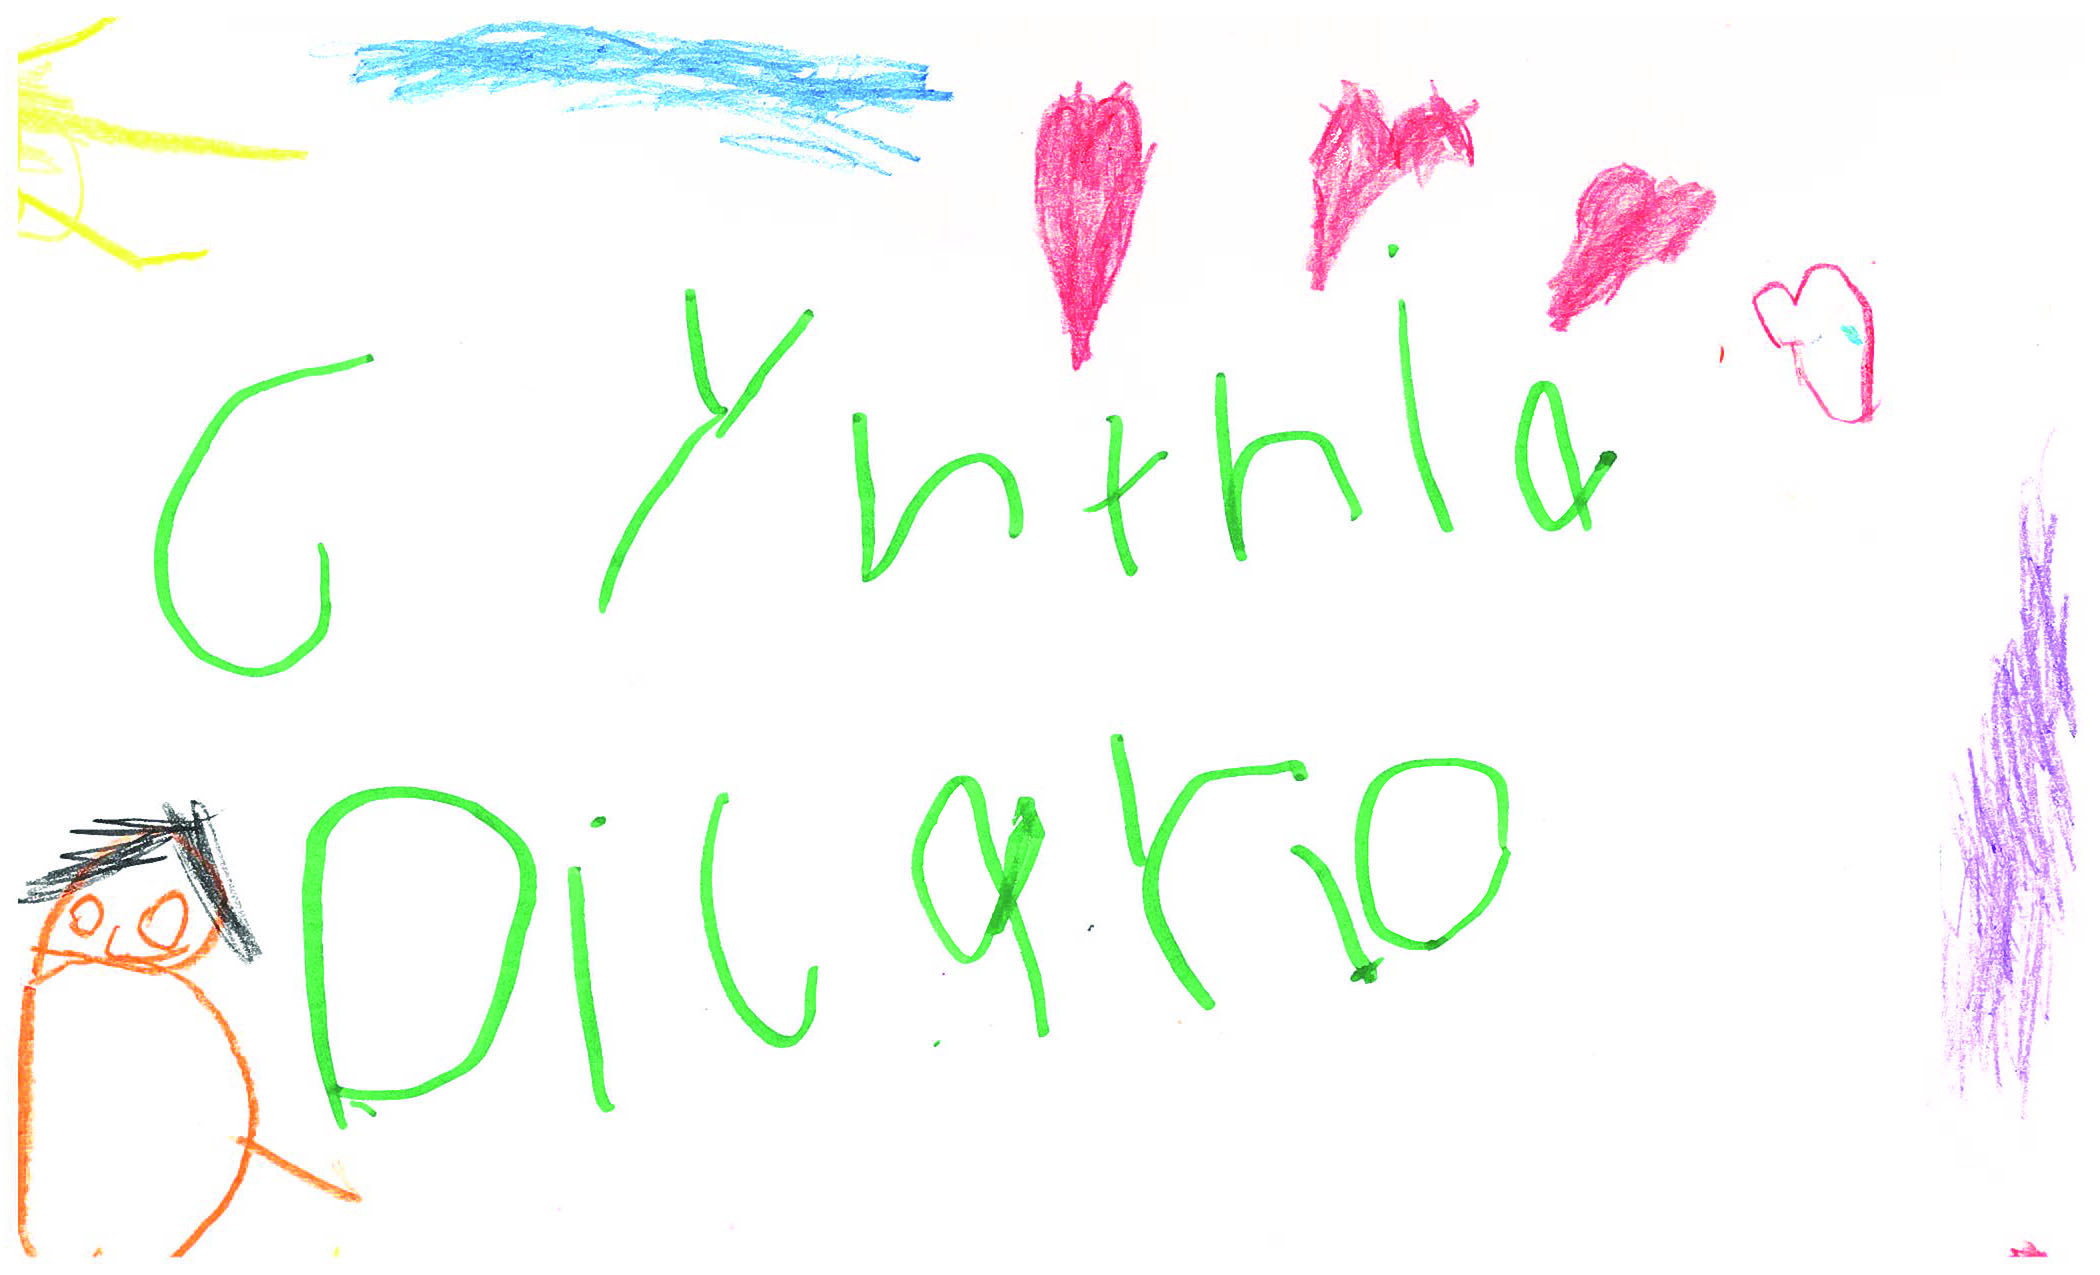 picture in child's writing that says Cynthia DiCarlo with doodles